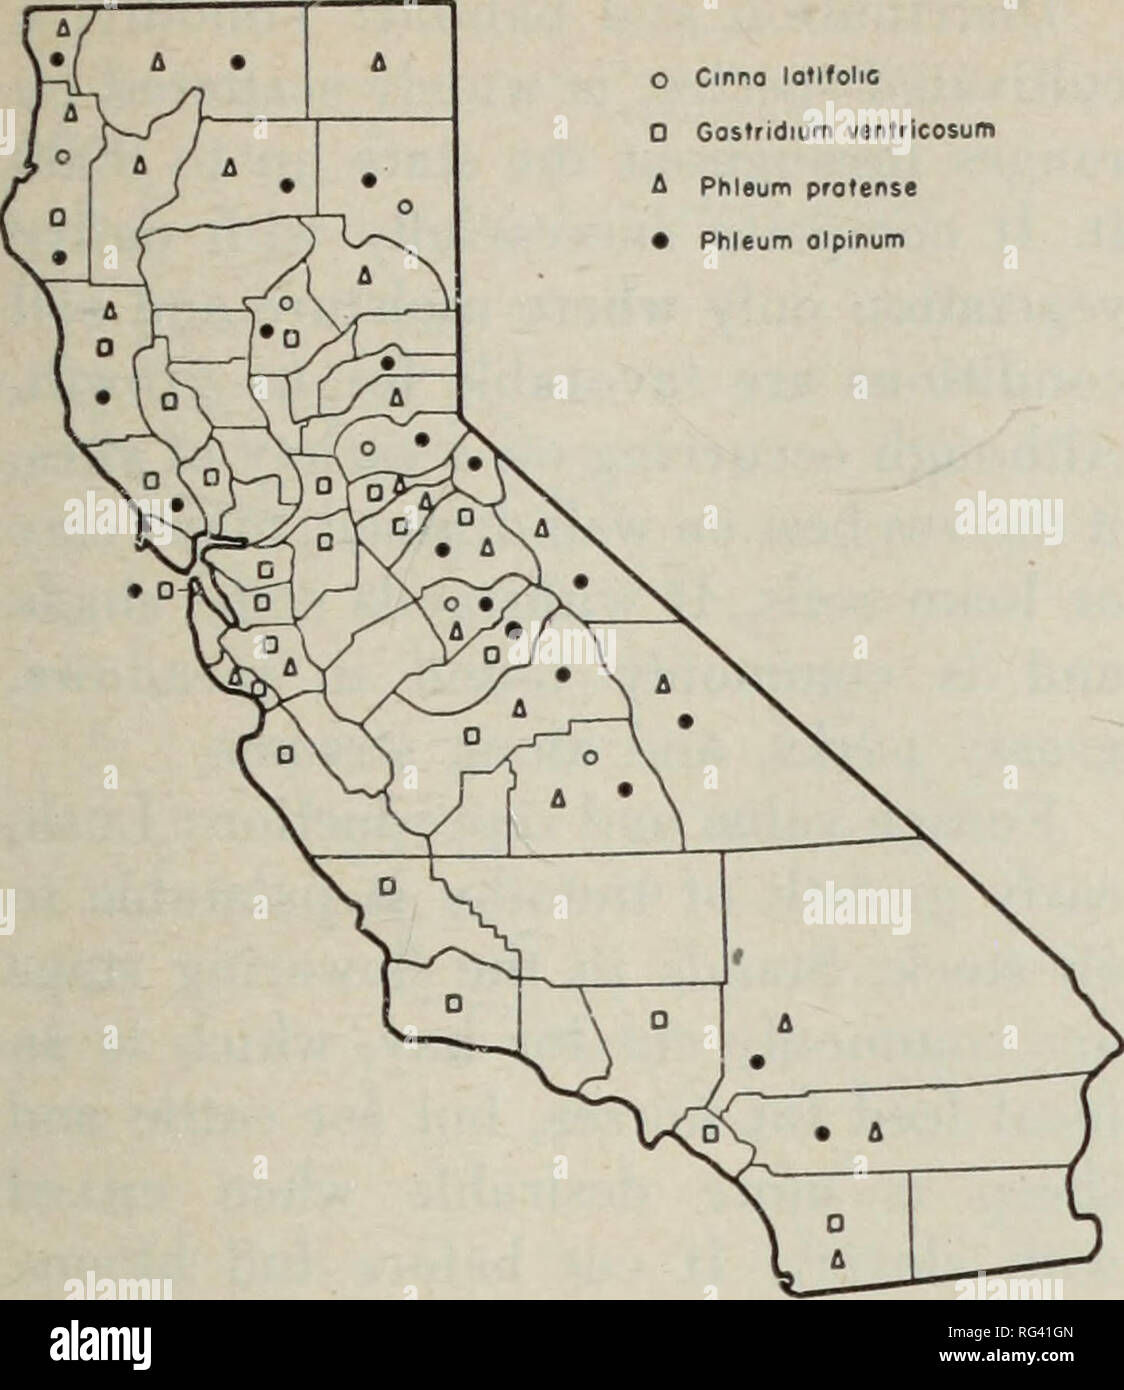 . California grasslands and range forage grasses. Grasses; Forage plants. Fig. 85. Distribution of common timothy (Phleum pratense), alpine timothy (P. alpinum), drooping woodreed (Cinna latifolia), and nit- grass (Gastridium ventricosum). 27. TIMOTHY {PHLEUM) Alpine timothy and common timothy are both found on California ranges. (Fig. 85.) They are densely tufted leafy peren- nials with flat blades and dense ovoid or cylindric panicles; spikelets flat, the glumes abruptly short-awned, the floret small and round. Key to Species Panicle ovoid or oblong, usually not more than twice as long as wi Stock Photo